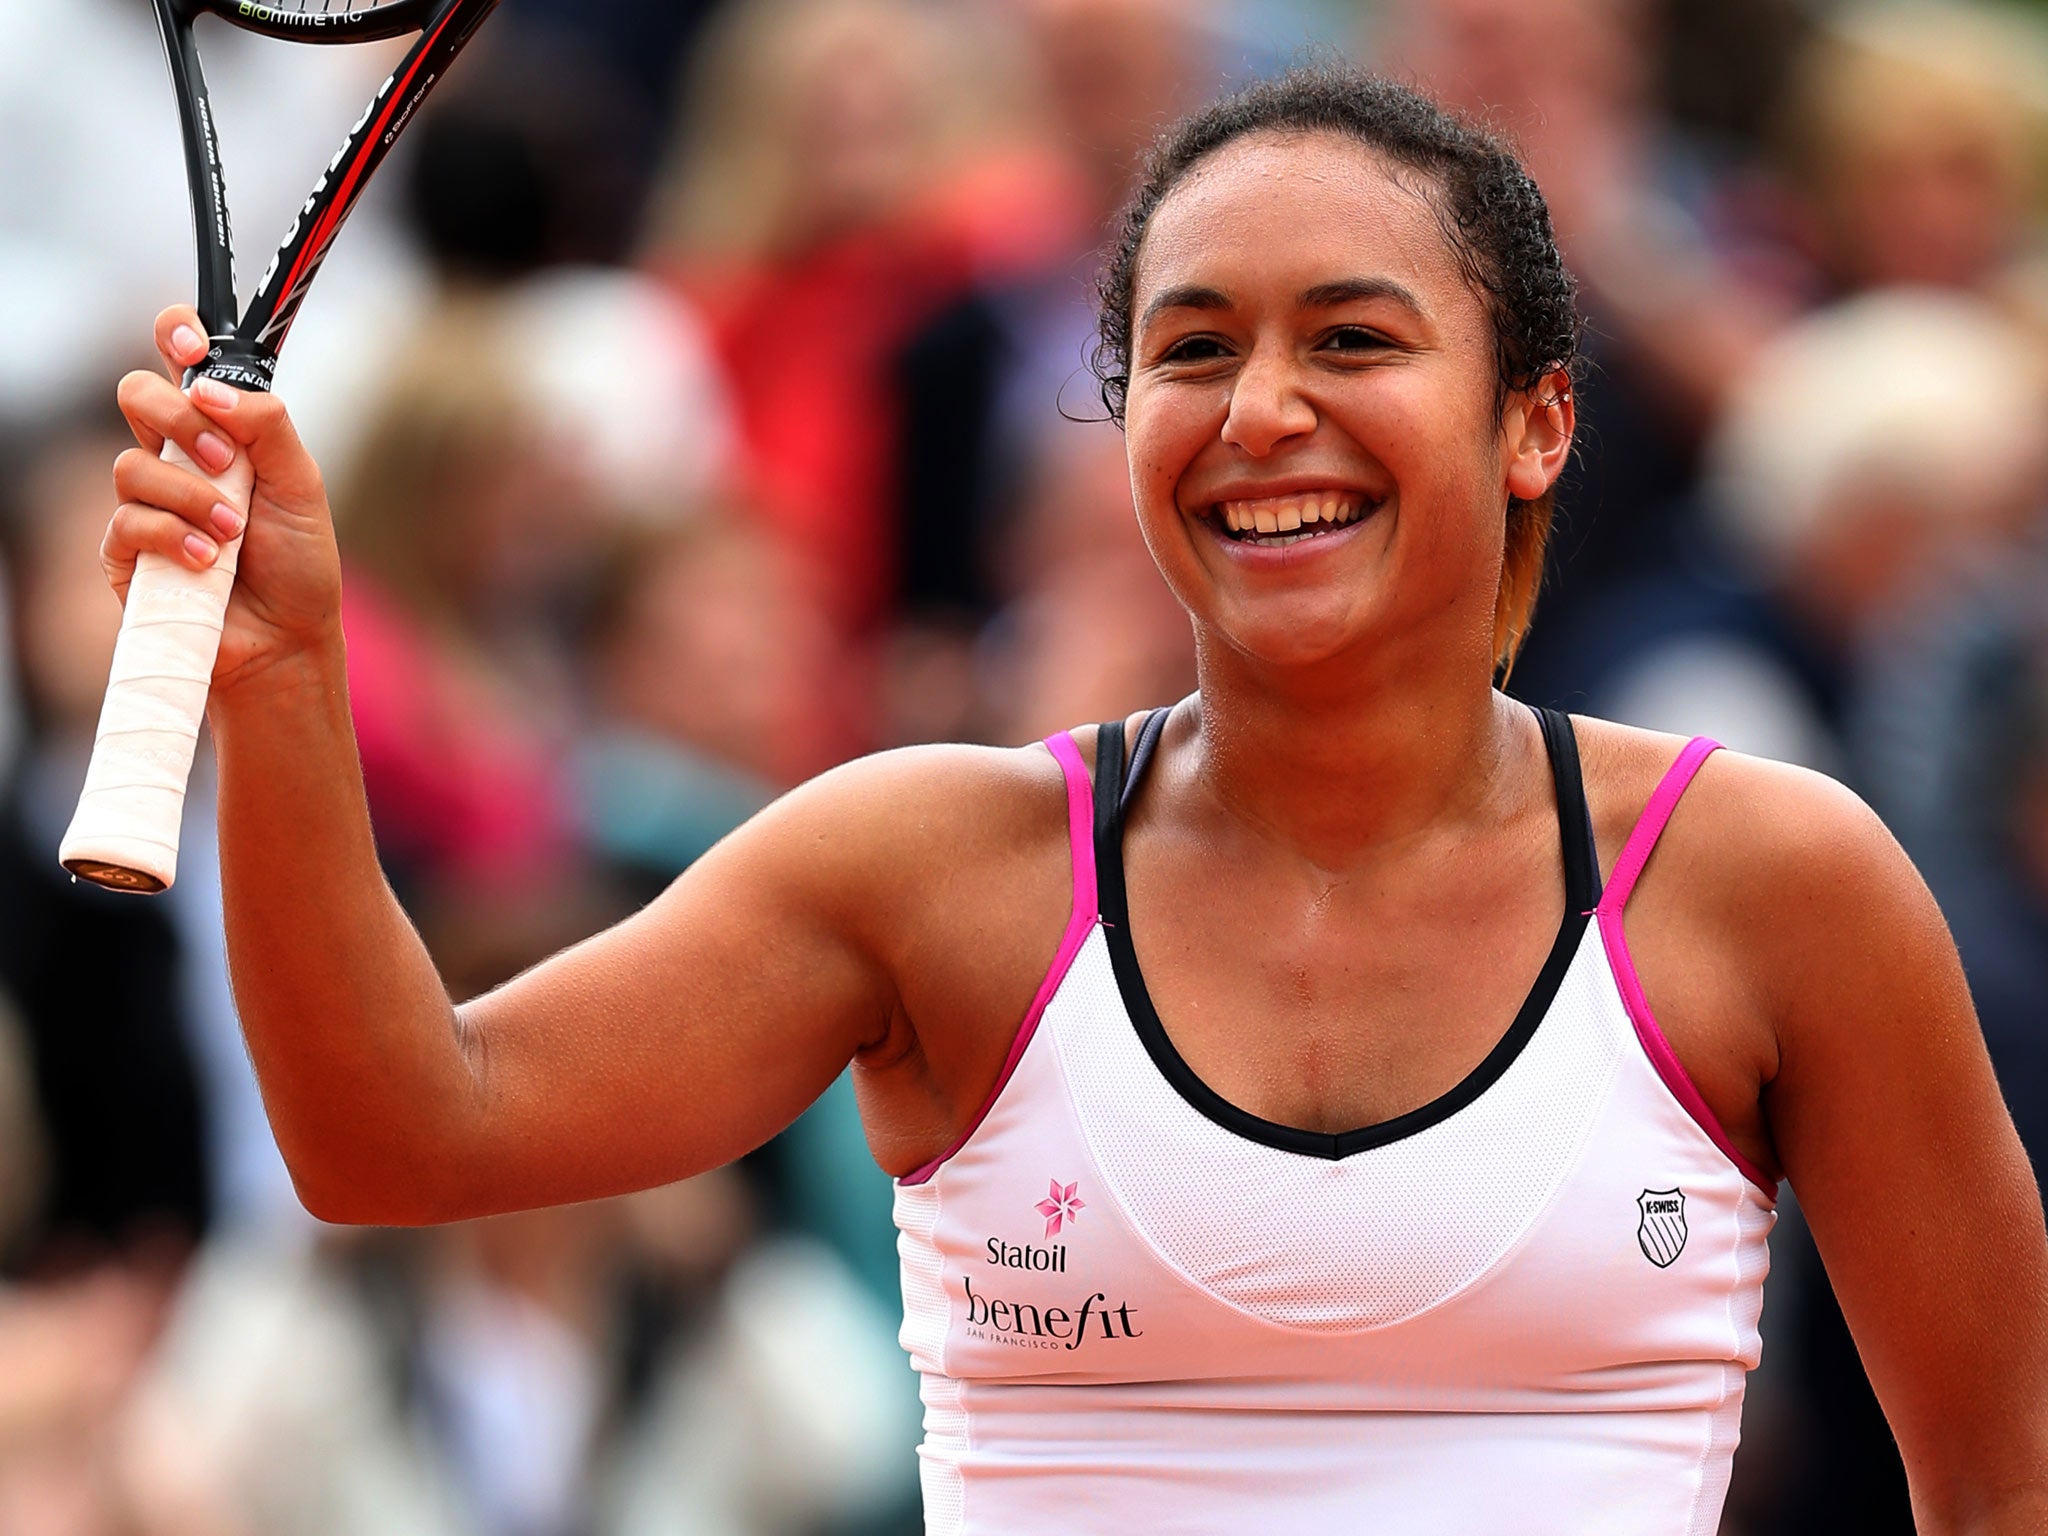 Heather Watson of Great Britain celebrates victory in her women's singles match against Barbora Zahlavova Strycova of Czech Republic on day three of the French Open